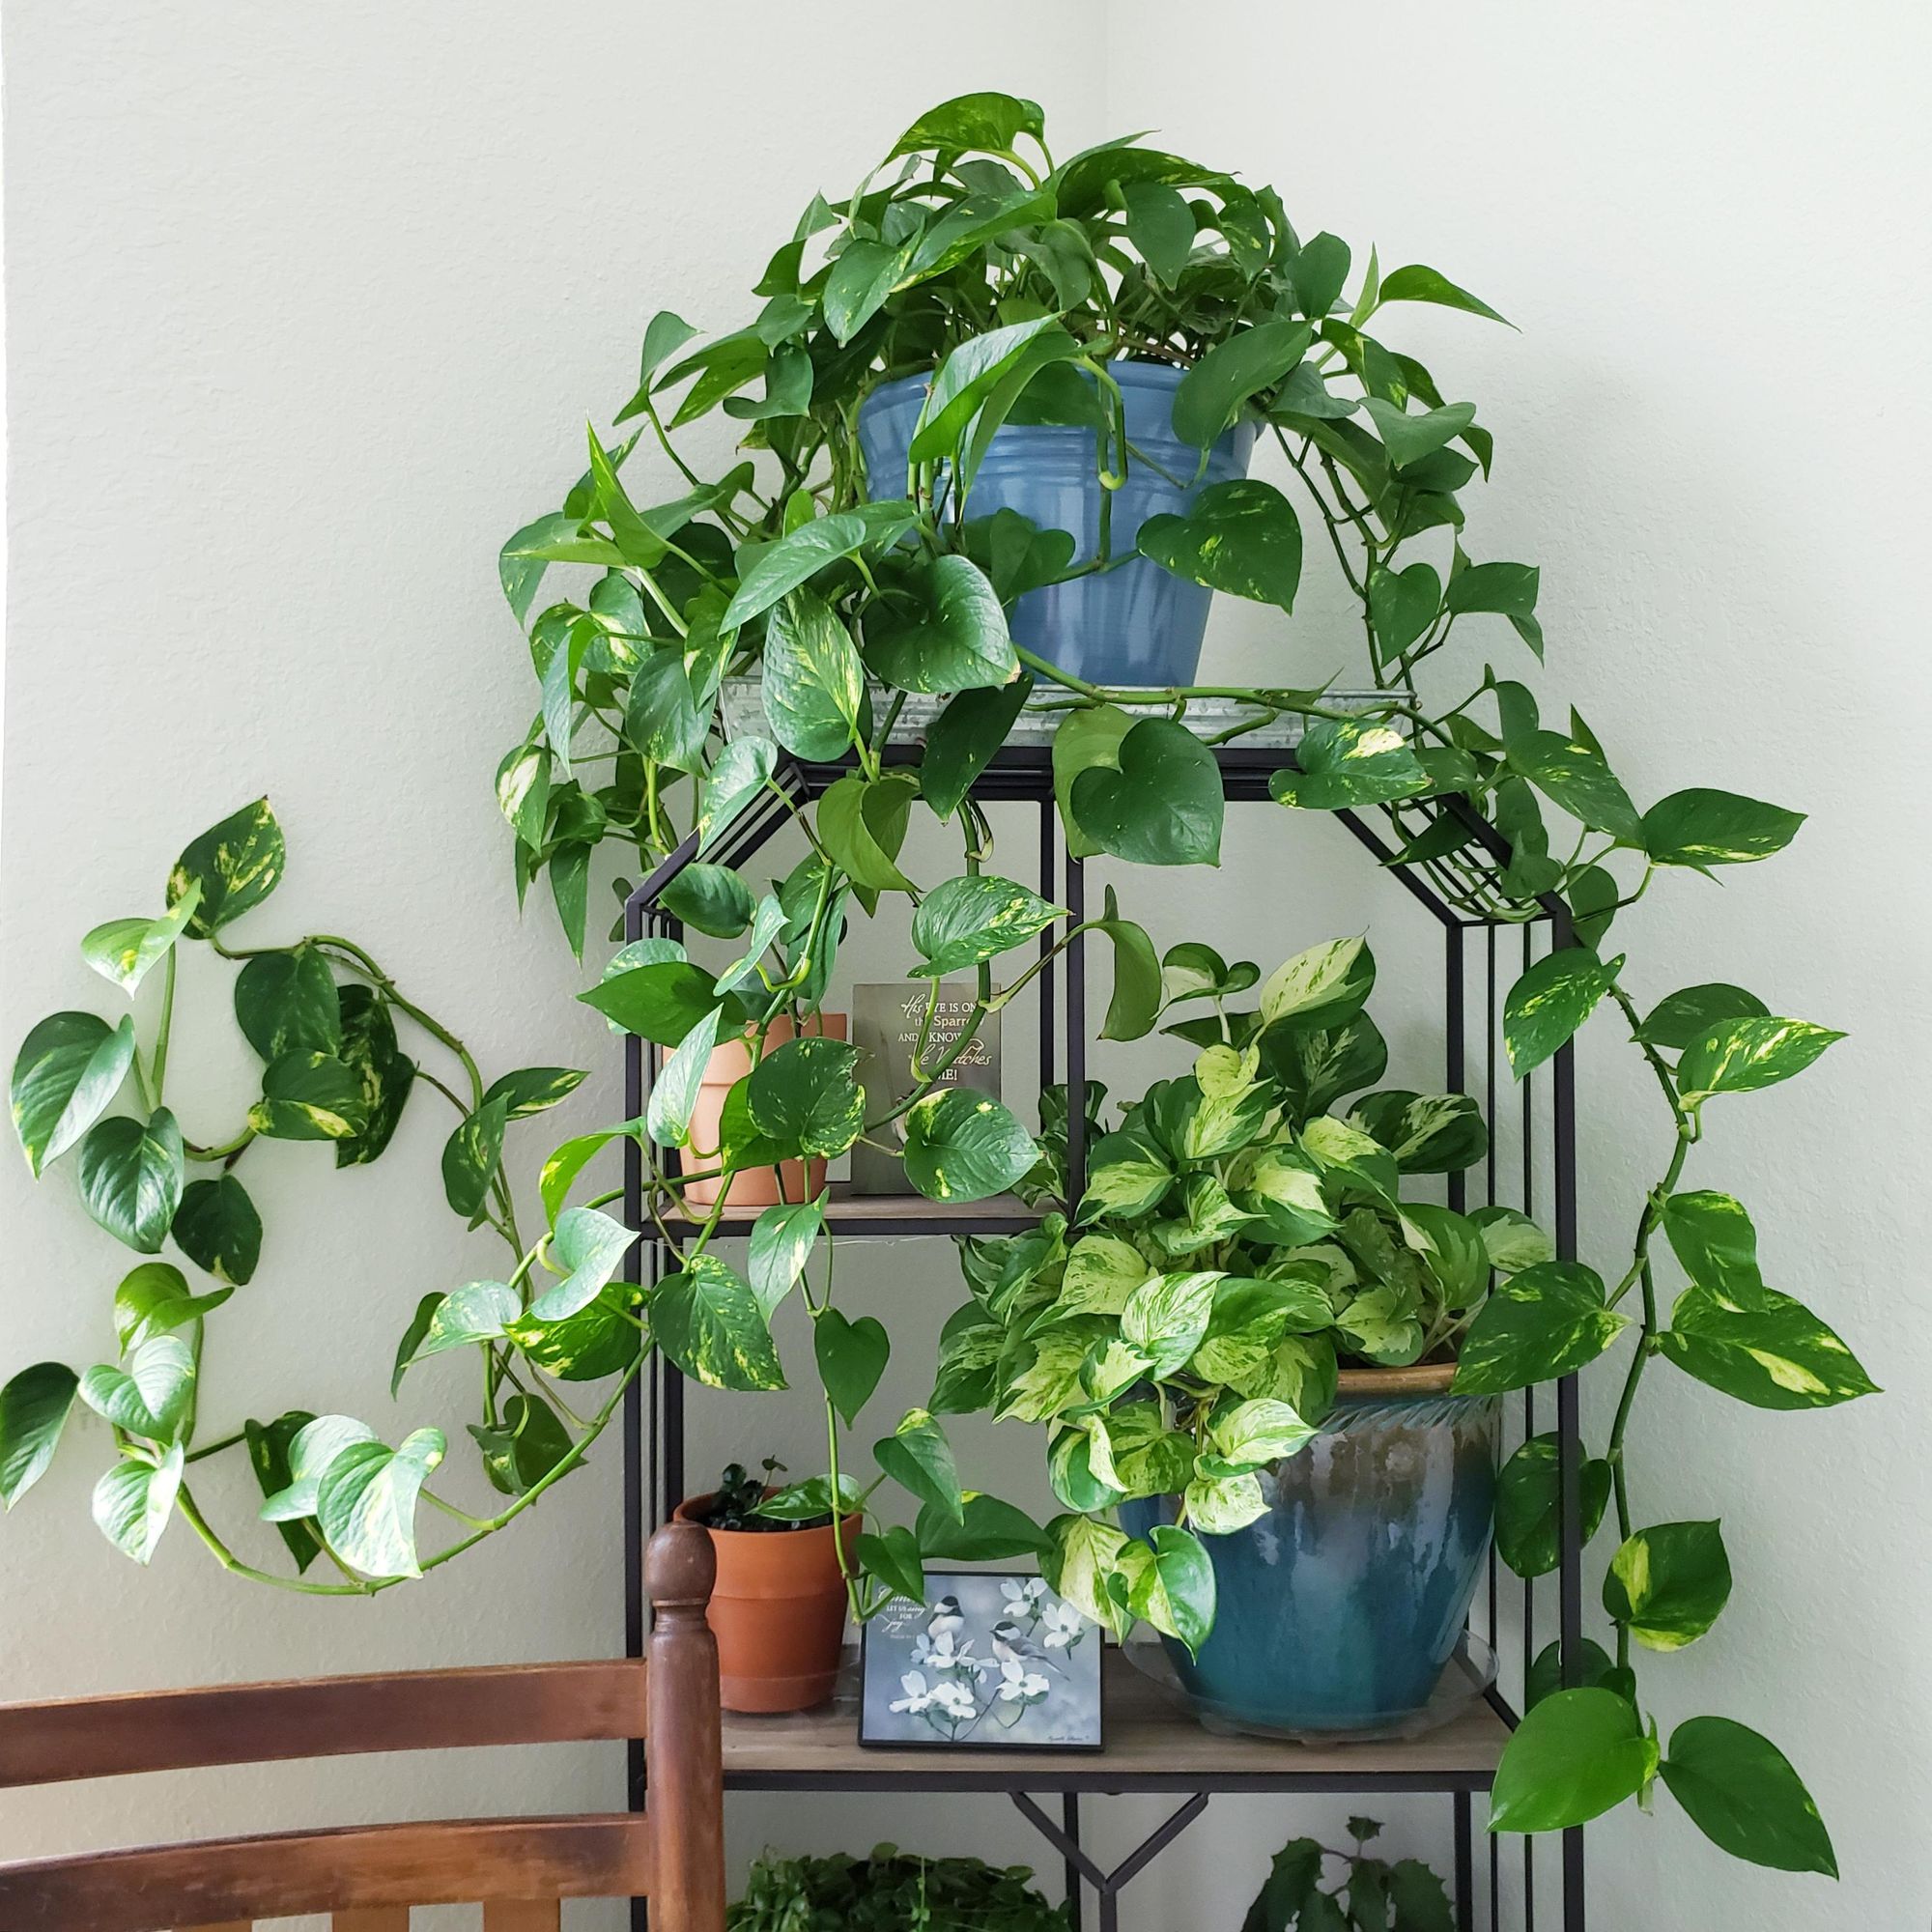 7 Reasons Why Pothos Plants Are The Best Houseplants For Beginners